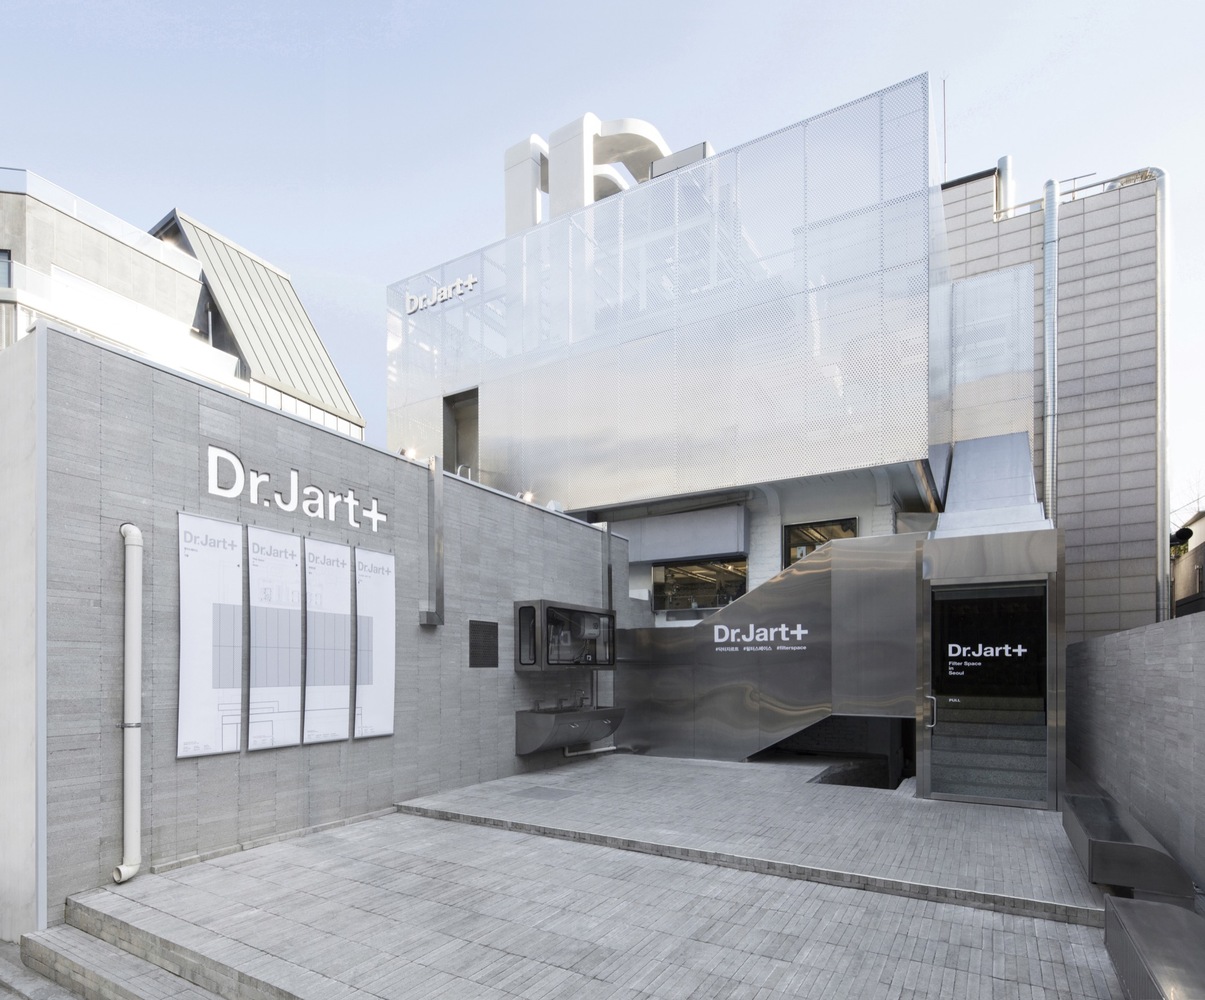 Dr. Jart+ Flagship Store-Betwin Space Design-Visual Atelier 8-1.jpg